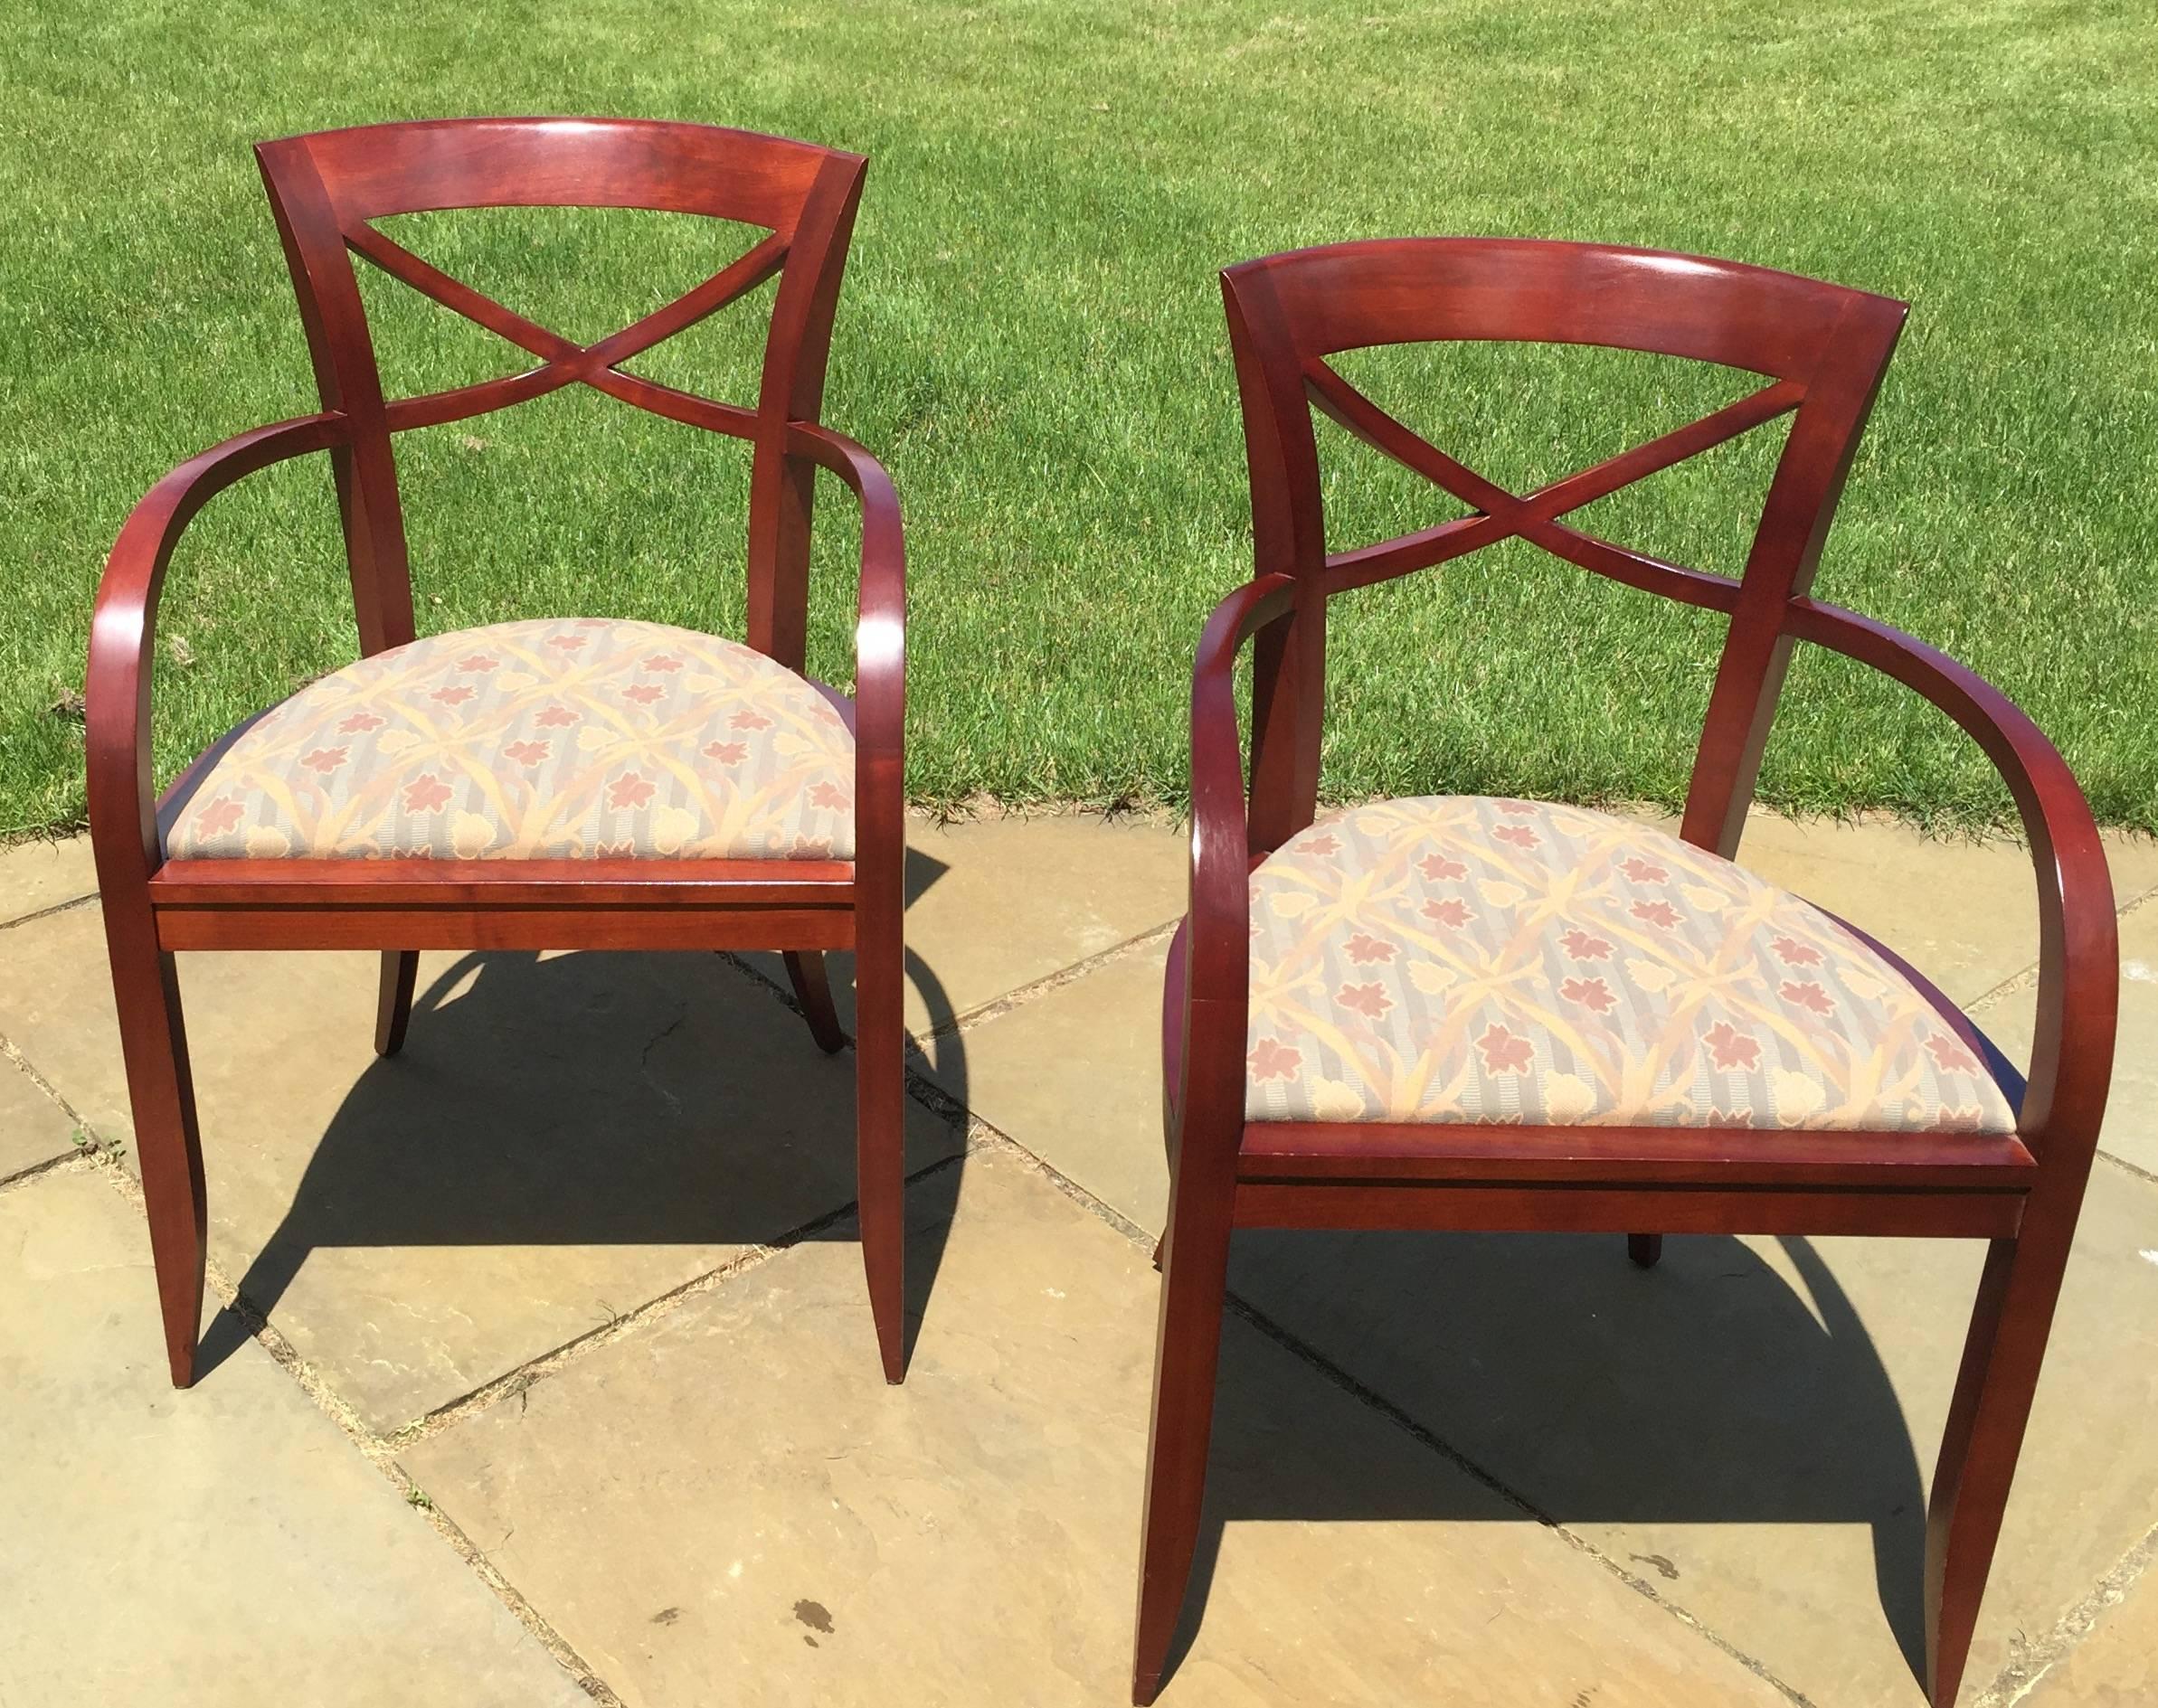 Hand-Crafted Pair of Armchairs by David Edward made of Cherrywood,  Baltimore, MD